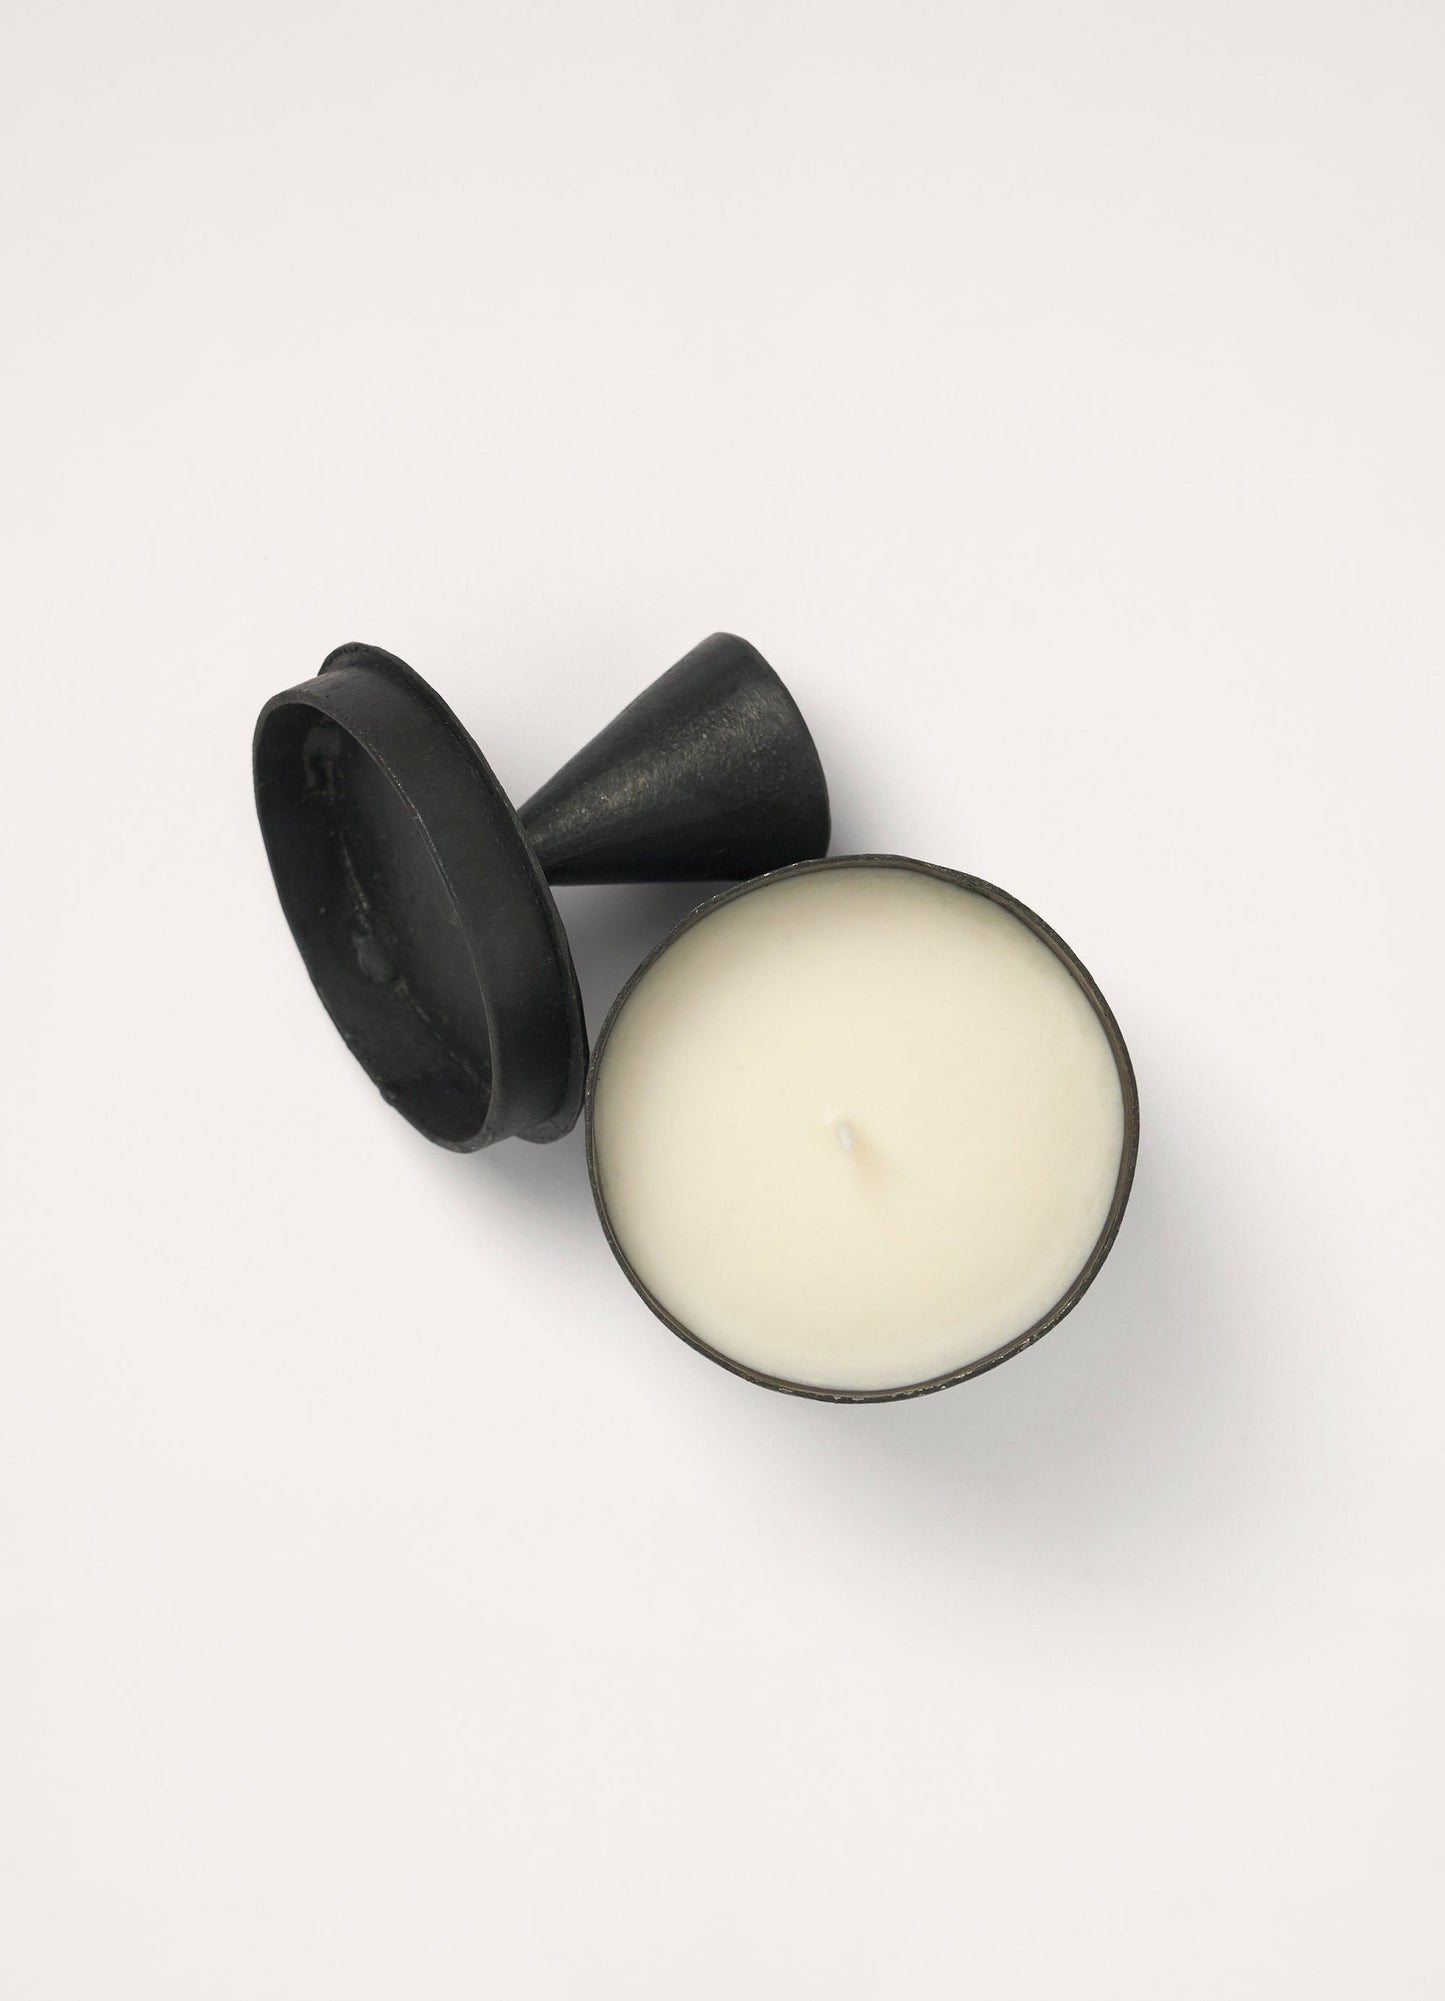 Lemaire x MAD et LEN BOIS D’ORAGE CANDLE (in- stock)